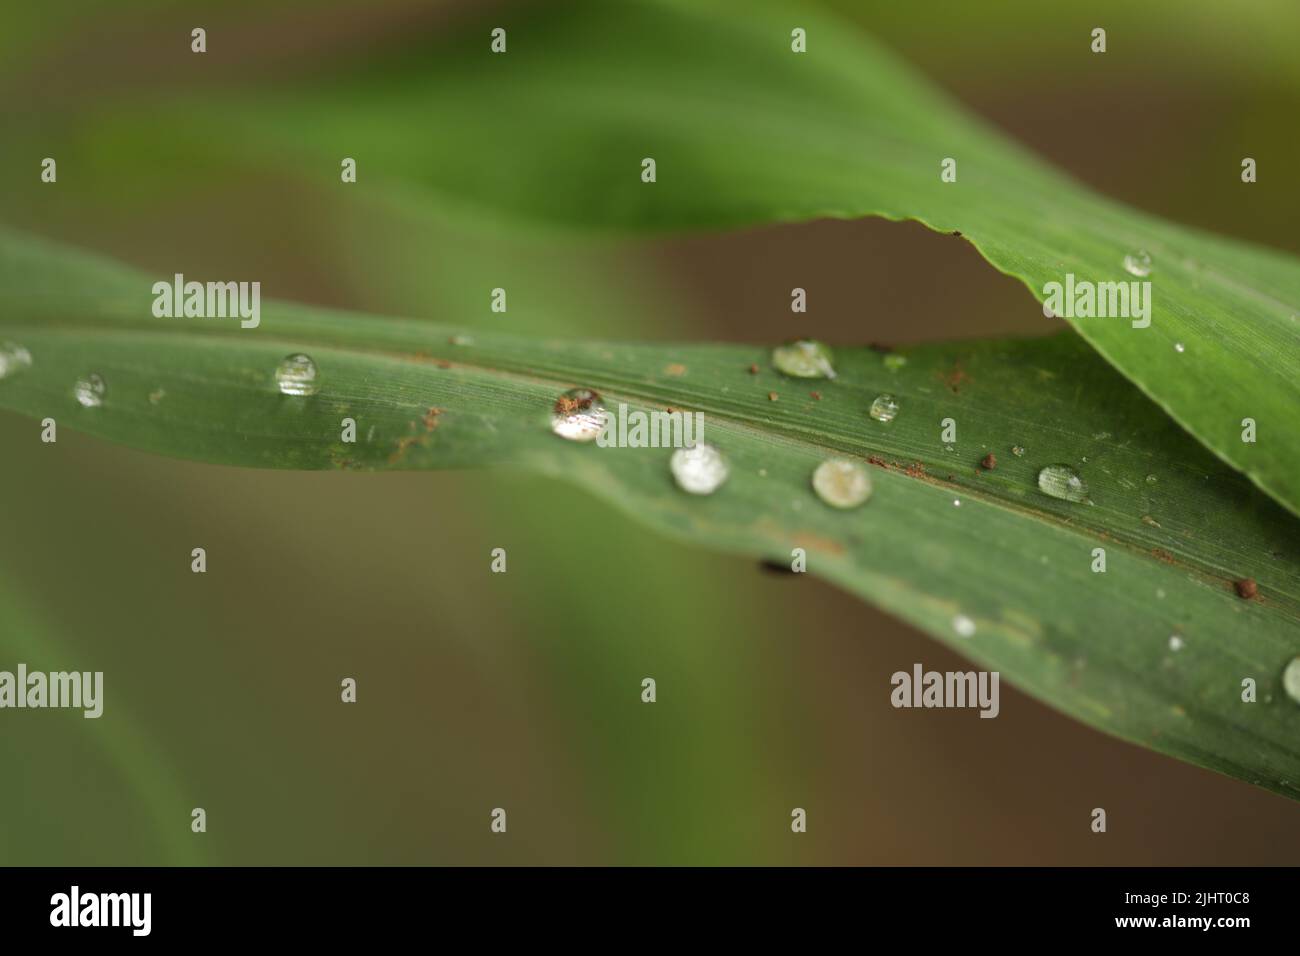 A closeup shot of water drops on a green leaf surface after rain in a forest Stock Photo